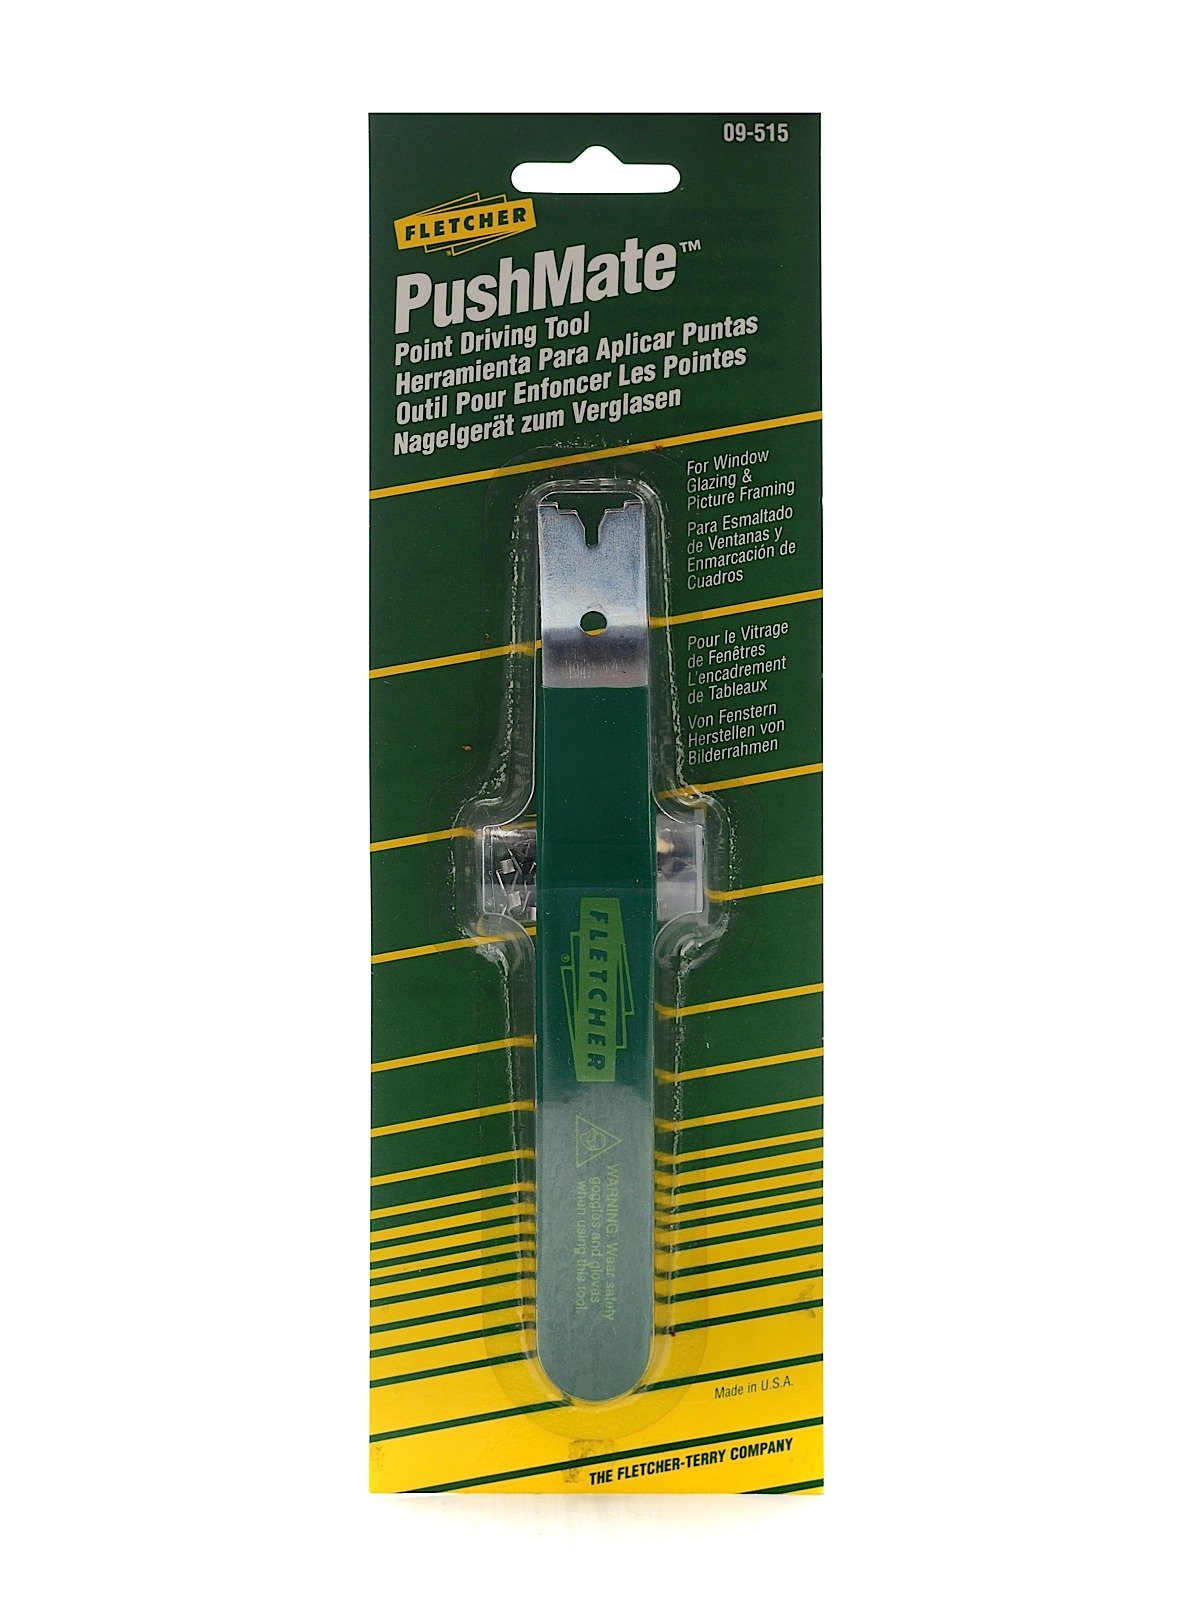 FLETCHER PUSHMATE POINT DRIVING TOOL PUSH POINTS PICTURE FRAME FRAMING GLAZING 